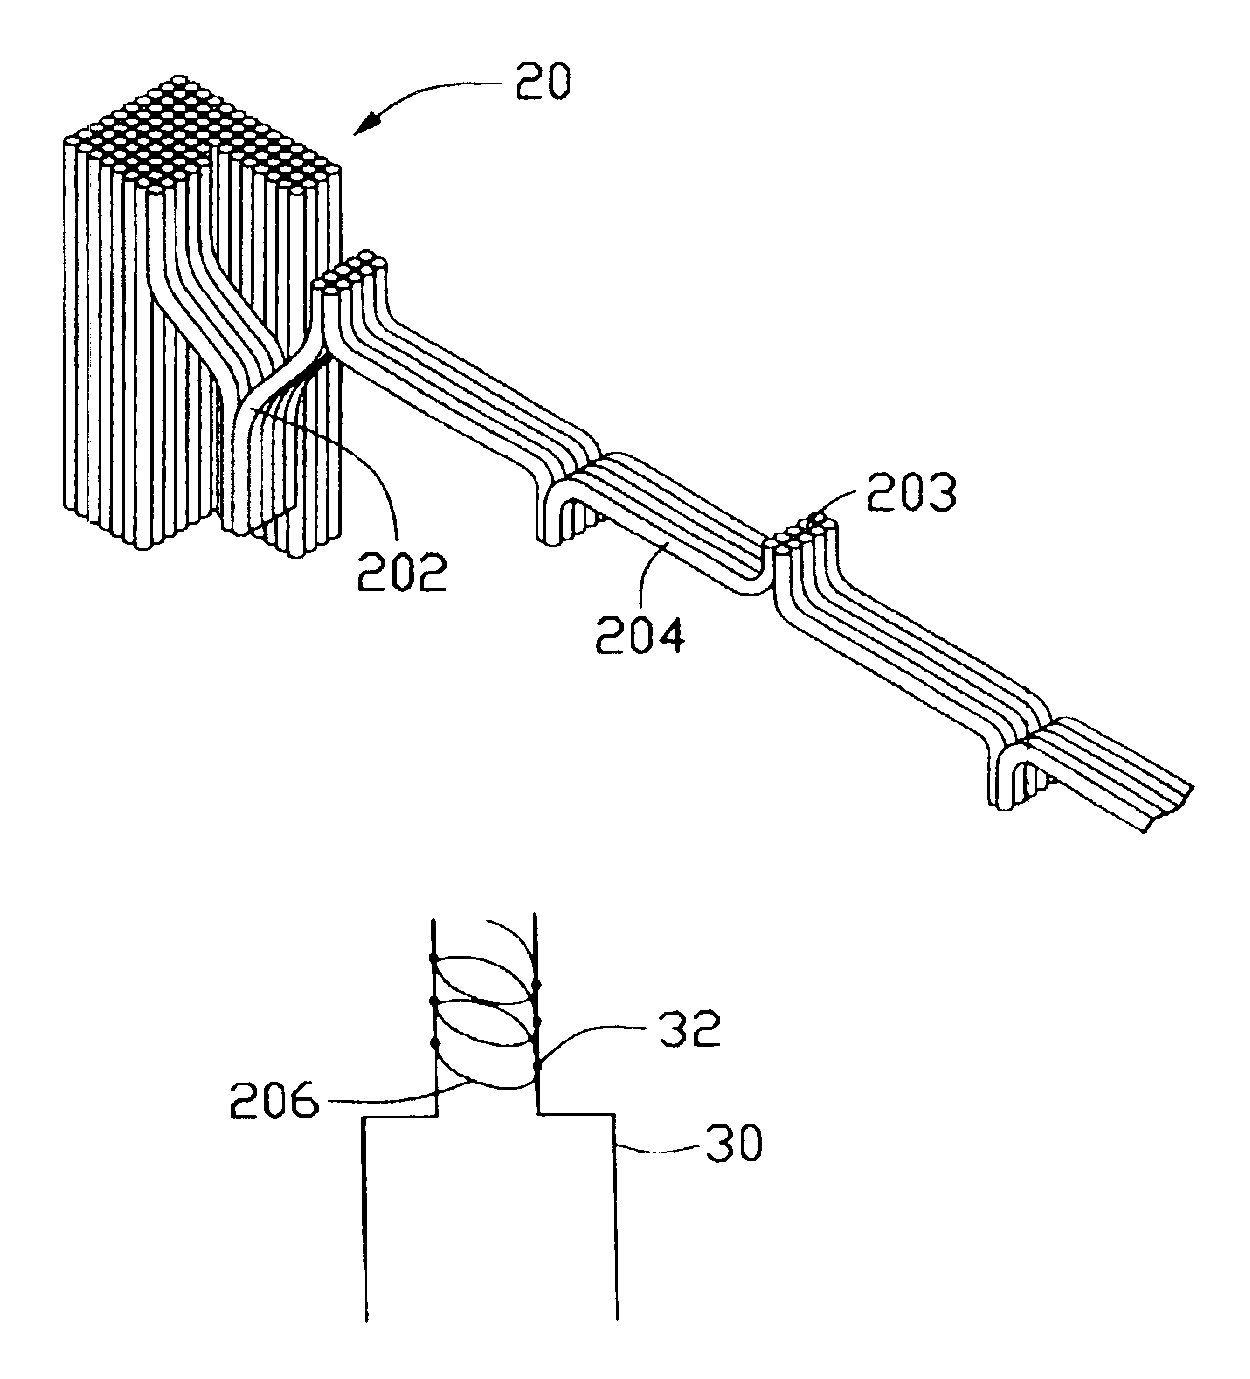 Method of manufacturing a light filament from carbon nanotubes